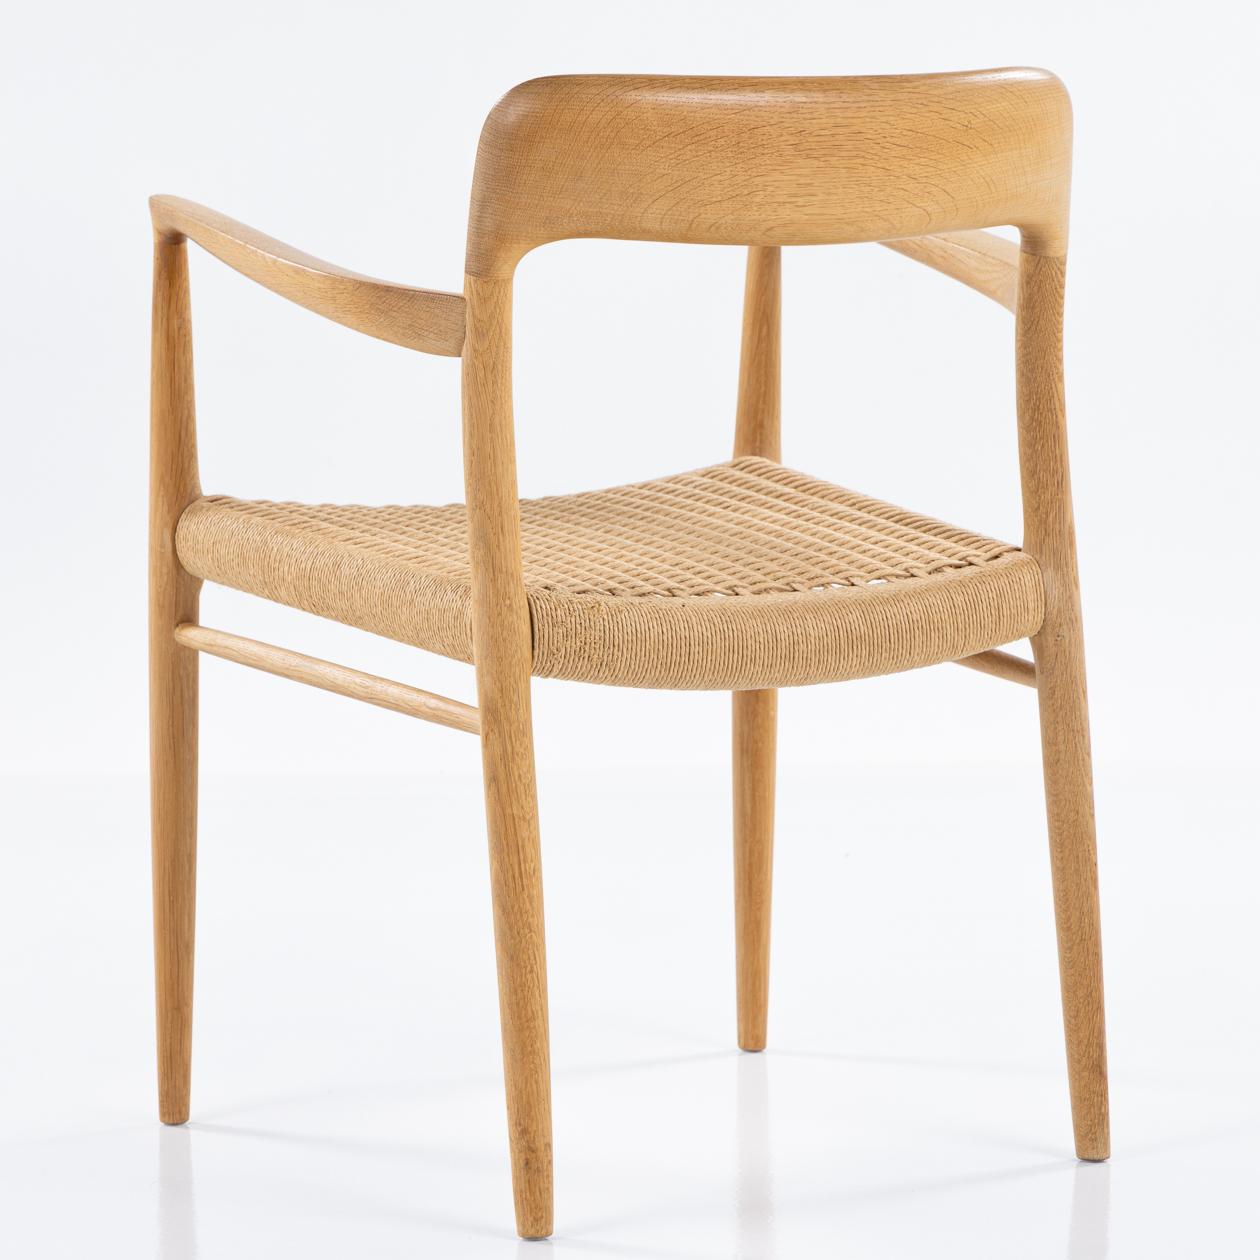 NO 56 - Armchair in oak with seat in patinated papercord. Niels O. Møller / J. L Møller.